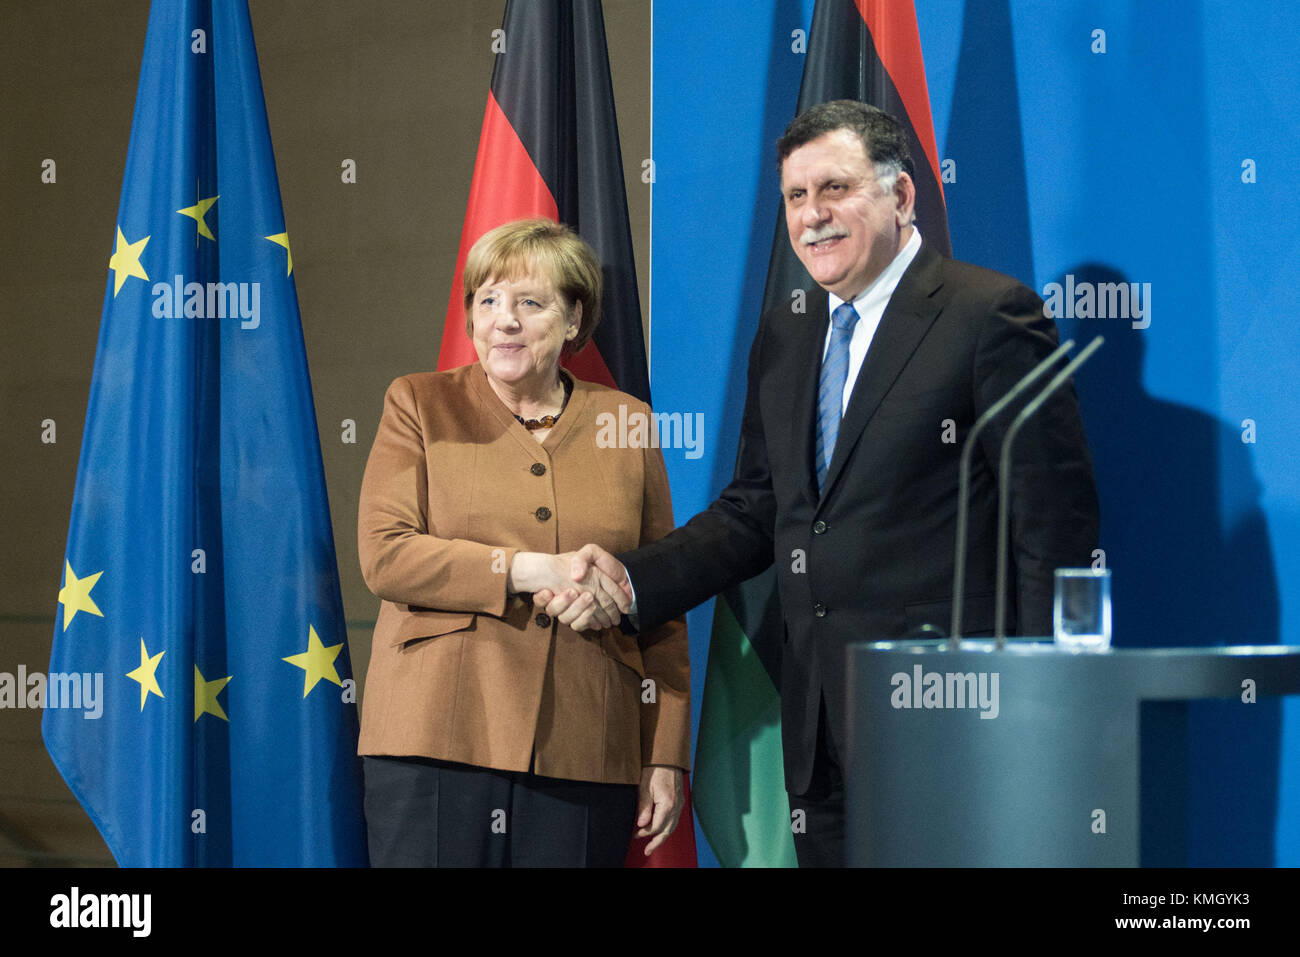 Berlin, Germany. 7th Dec, 2017. German Chancellor Angela Merkel (L) shakes hands with visiting Libyan UN-backed Prime Minister Fayez al-Sarraj at a press conference in Berlin, Germany, on Dec. 7, 2017. Merkel, after talks with Fayez al-Sarraj on Thursday, urged the Libyan authorities to improve the conditions of migrants in the North African country and pledged more support from the European Union. Credit: Zhang Yuan/Xinhua/Alamy Live News Stock Photo